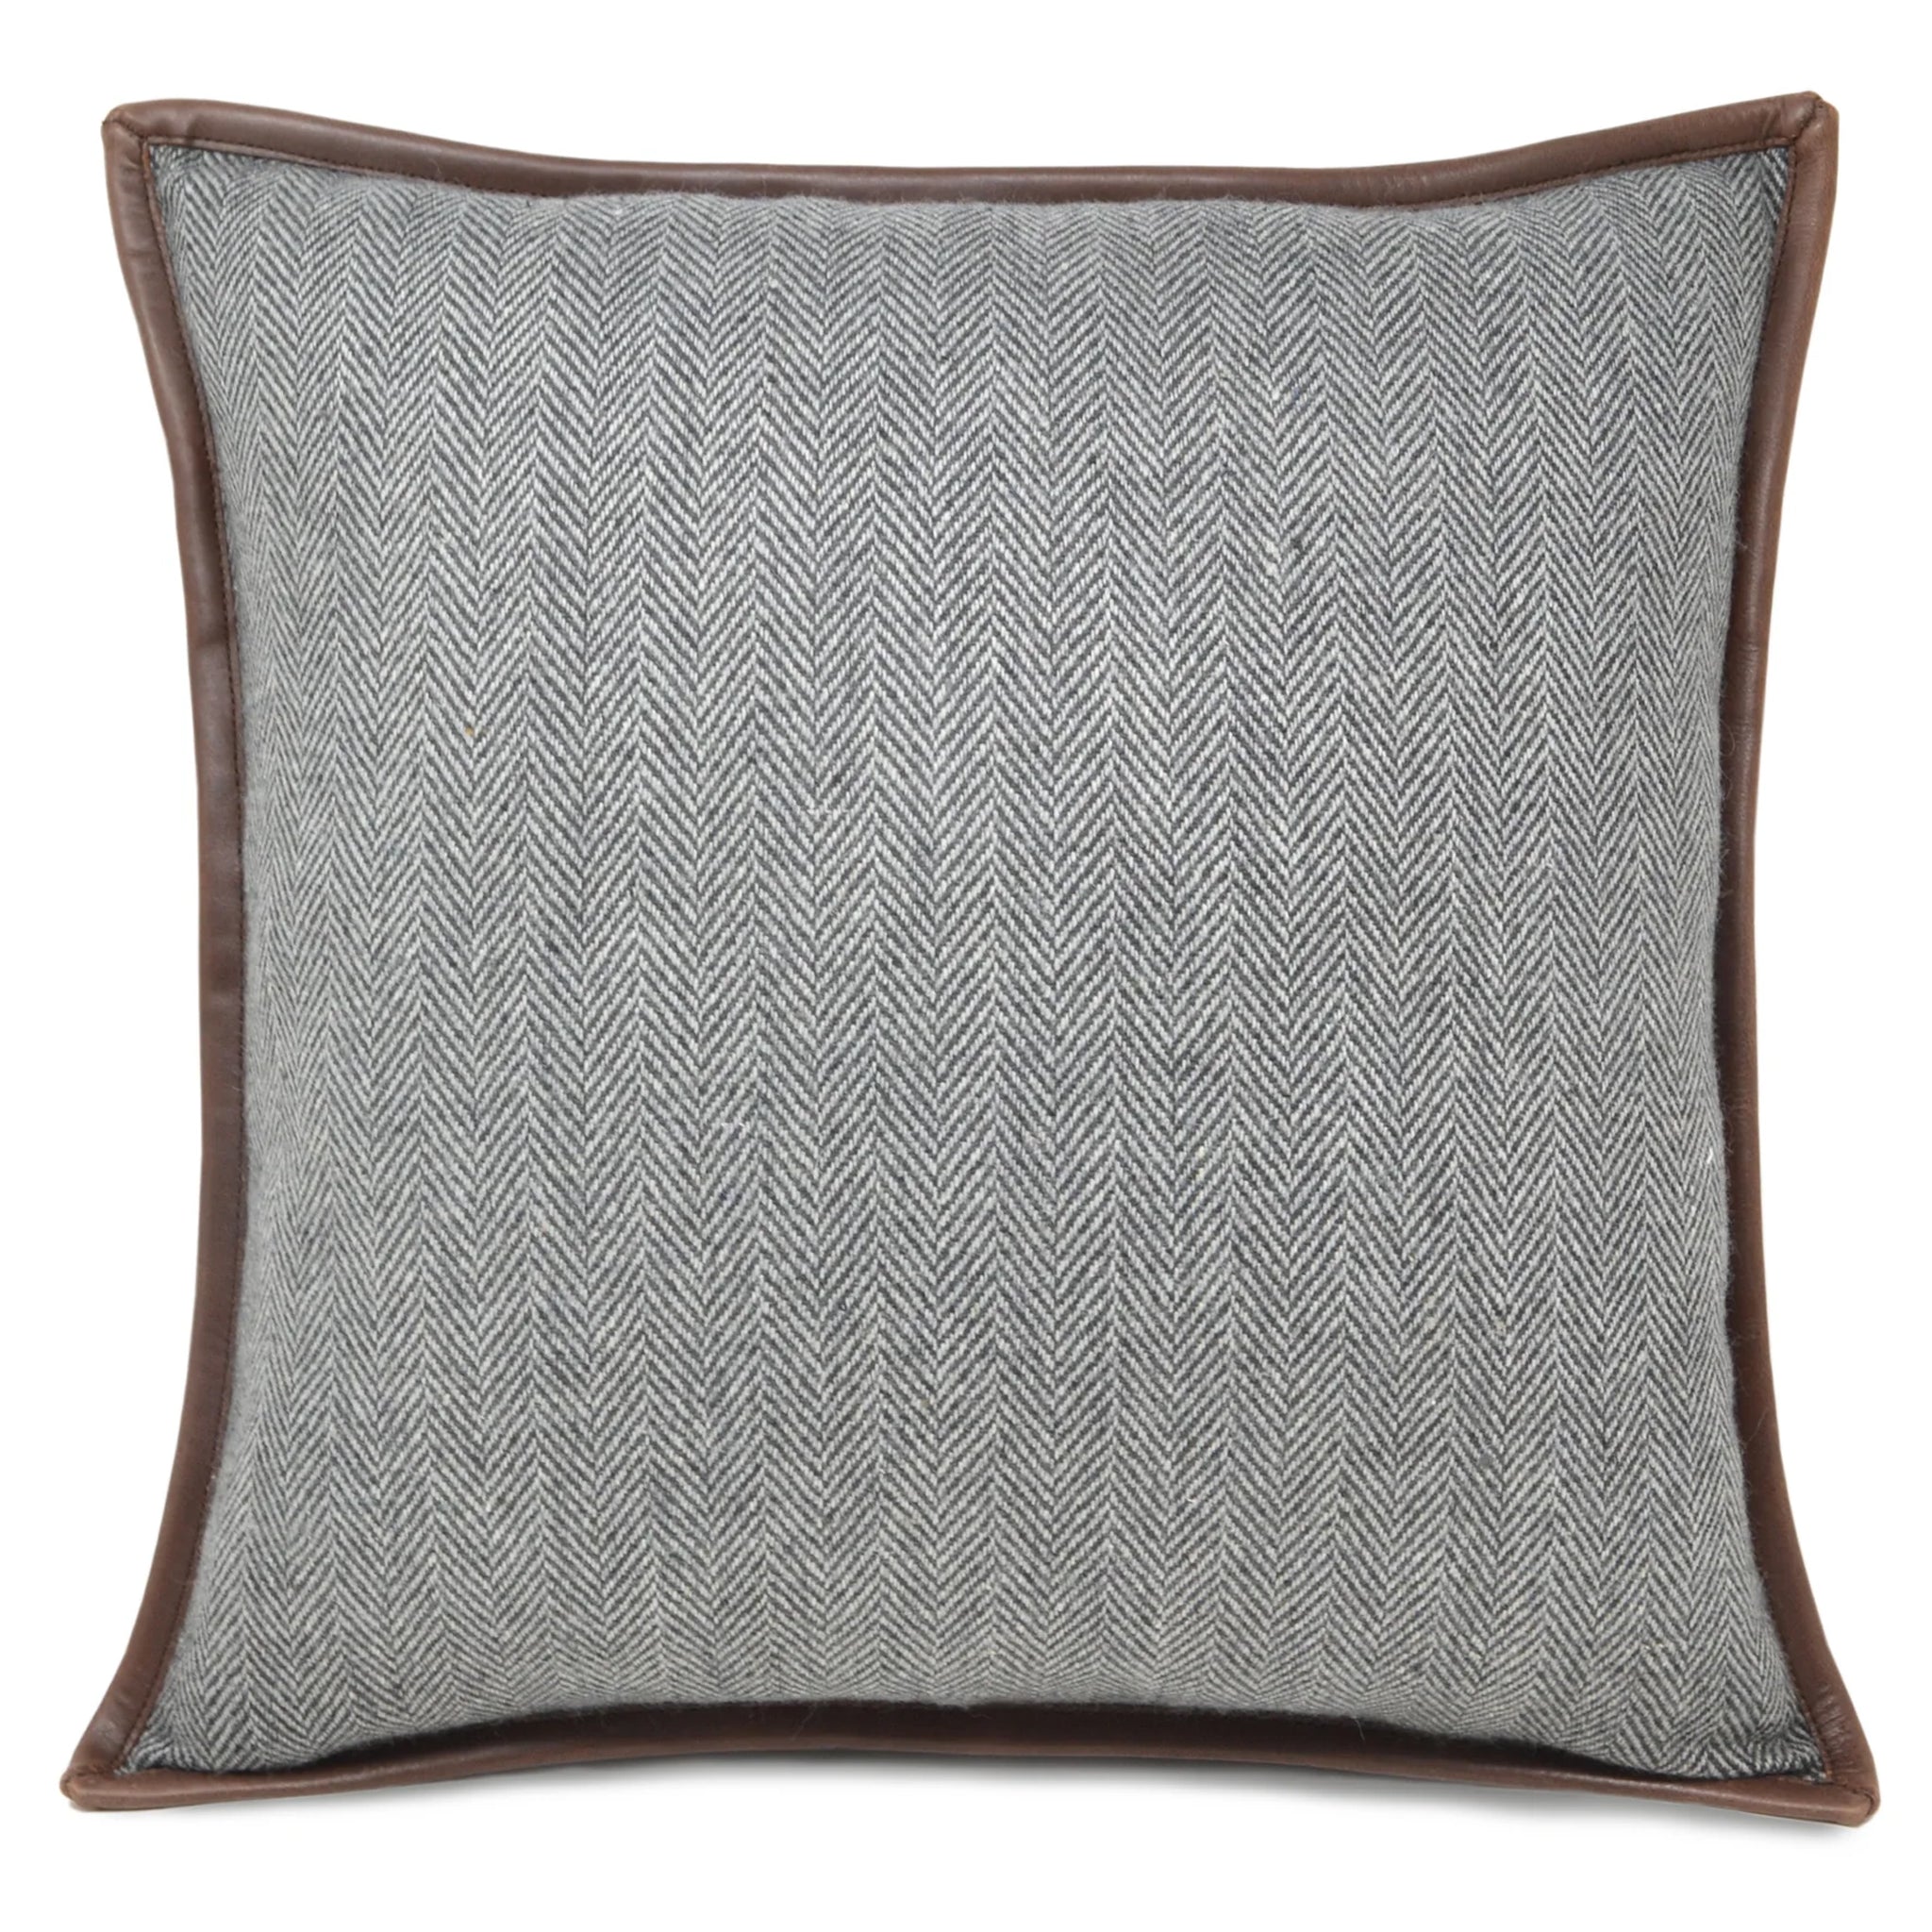 Chevron Wool Throw Pillow With Leather Trim